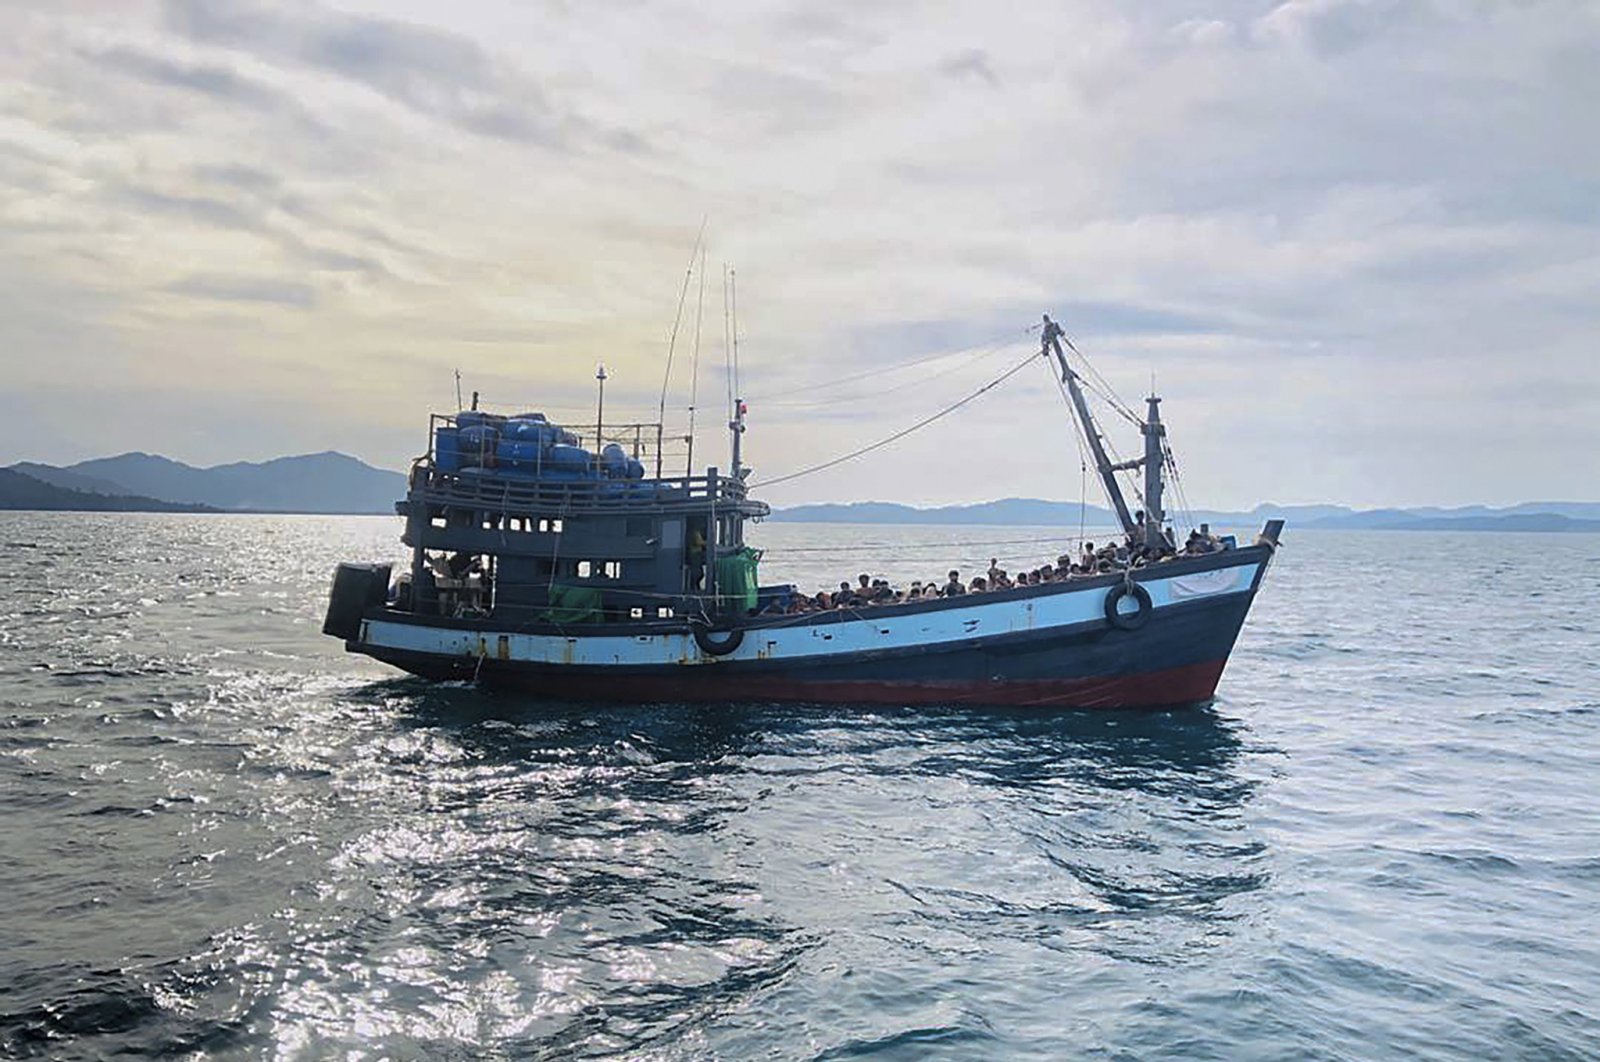 A wooden boat carrying suspected Rohingya migrants are detained in Malaysian territorial waters off the island of Langkawi, in the state of Kedah, Malaysia, April 5, 2020. (EPA Photo)